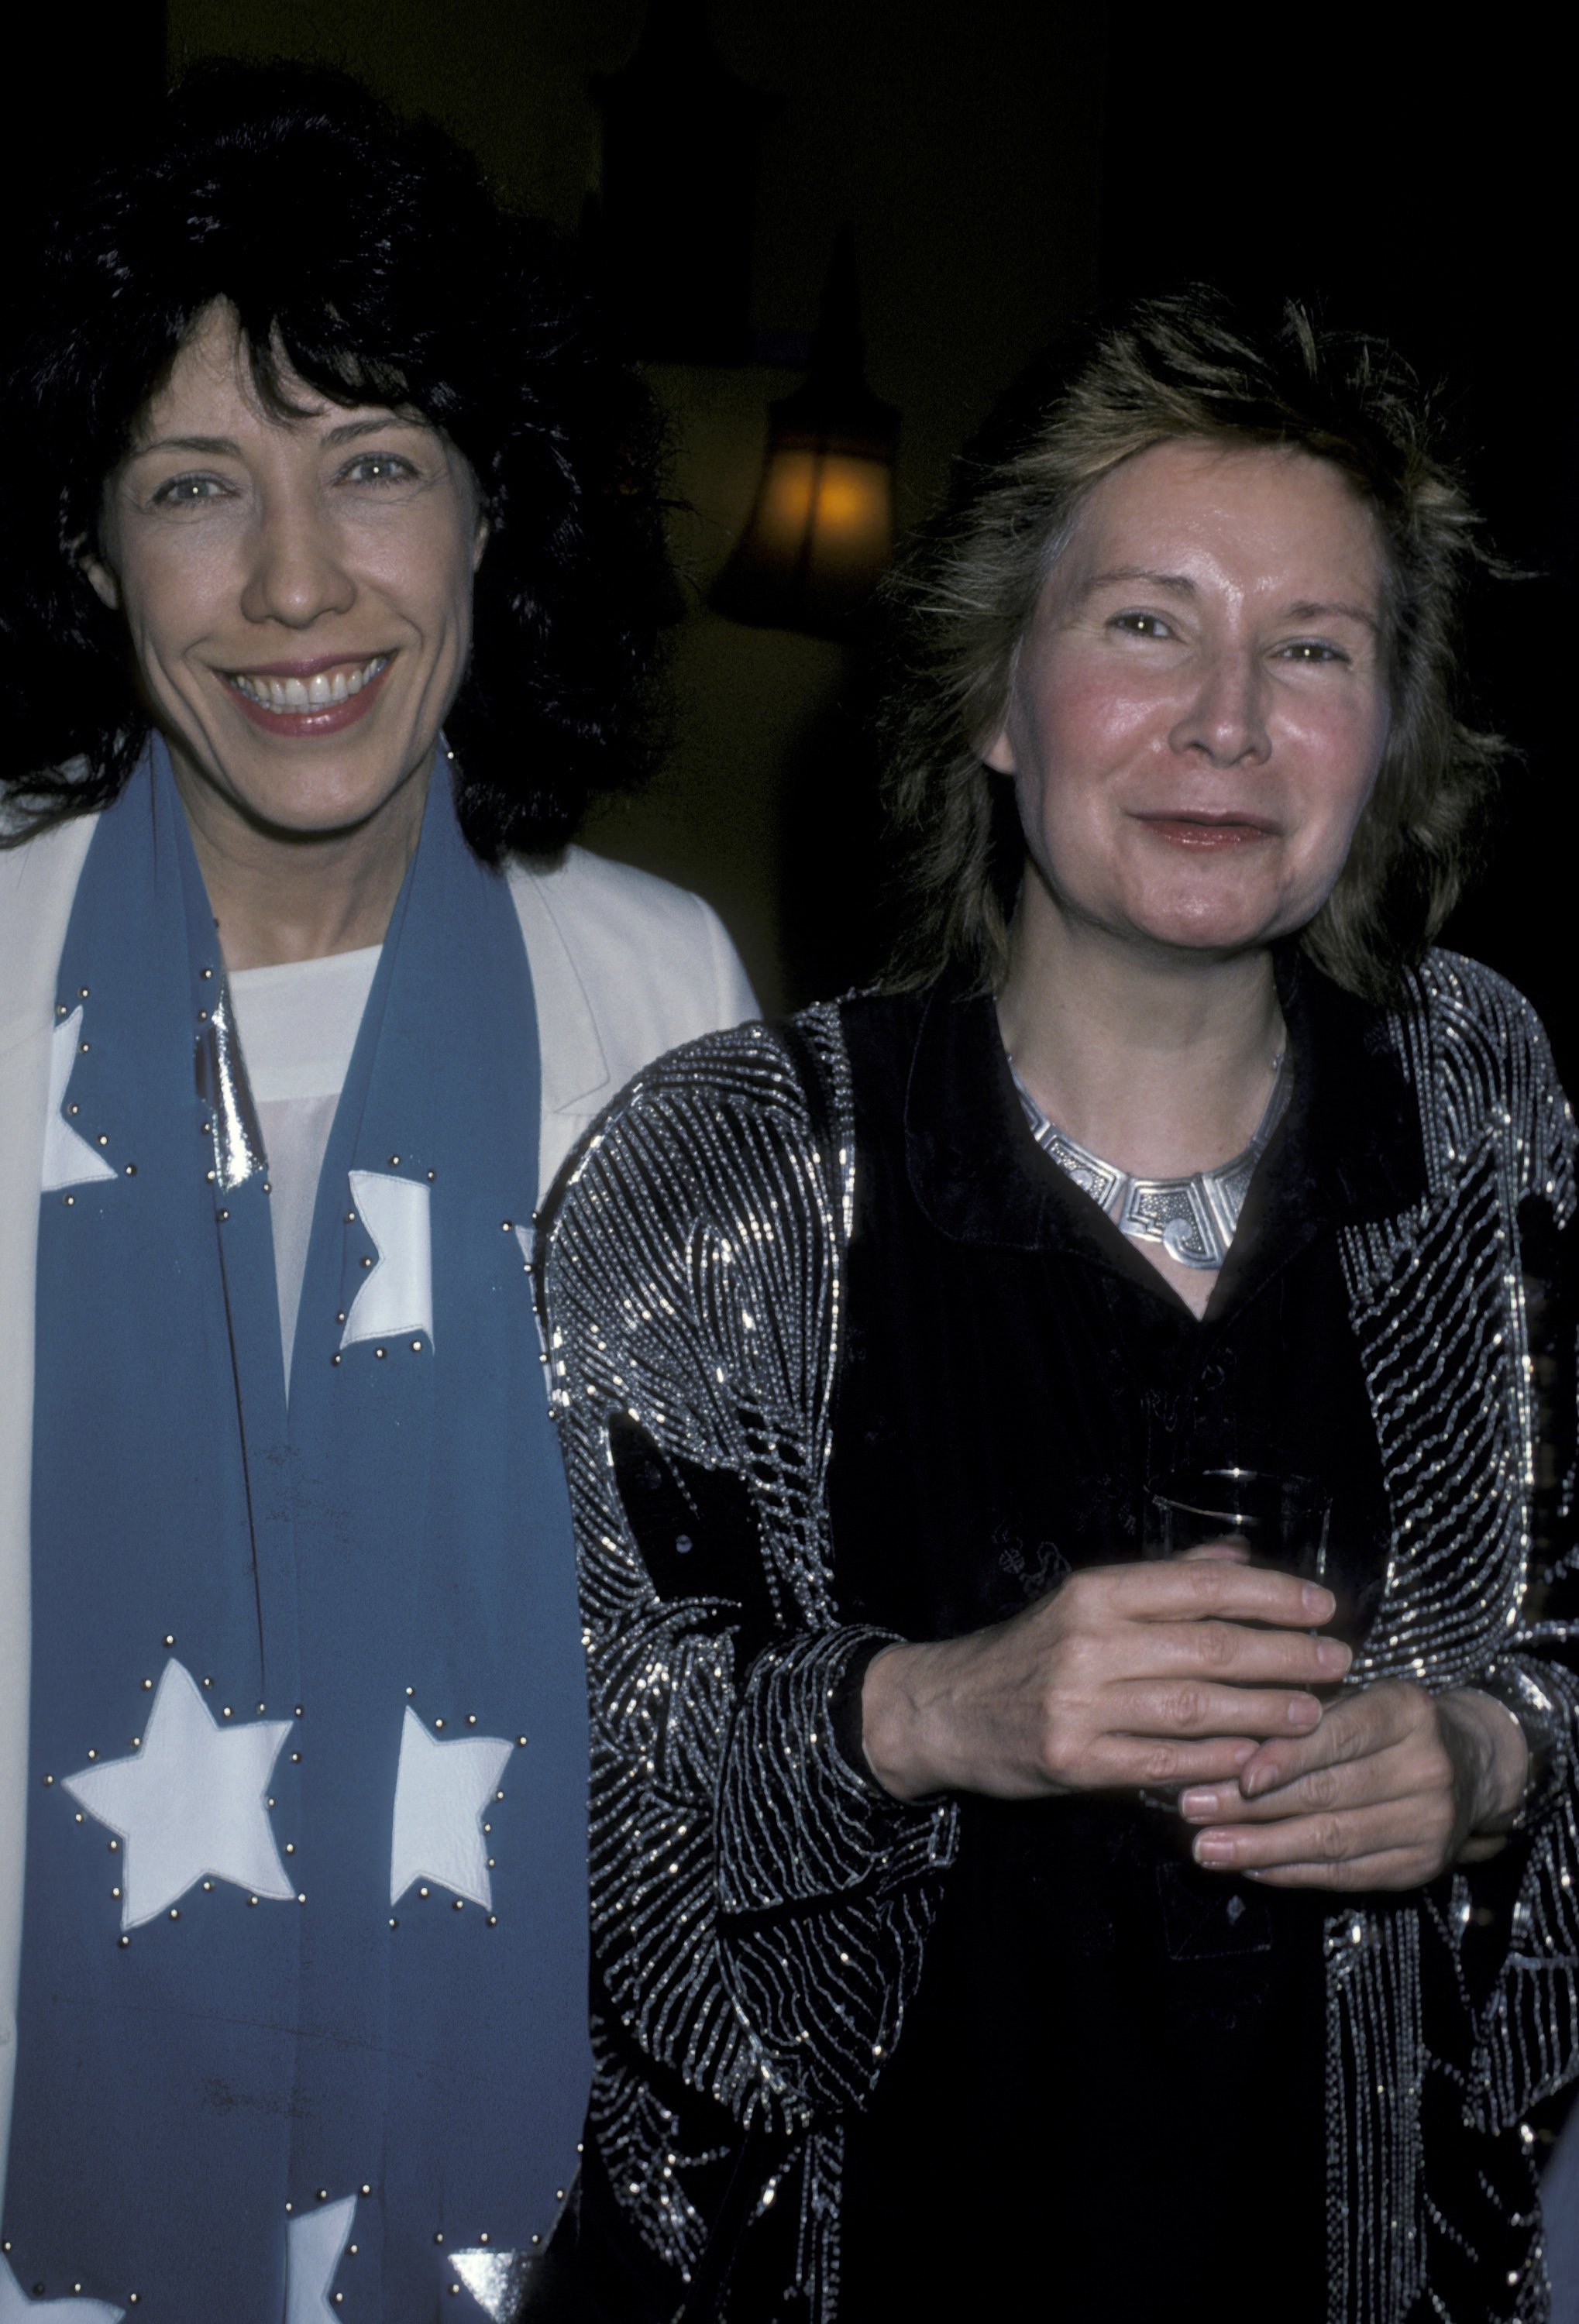 Lily Tomlin and Jane Wagner at the "New York Drama Circle Awards" on May 19, 1986, in New York City, New York. | Source: Ron Galella, Ltd./Ron Galella Collection/Getty Images